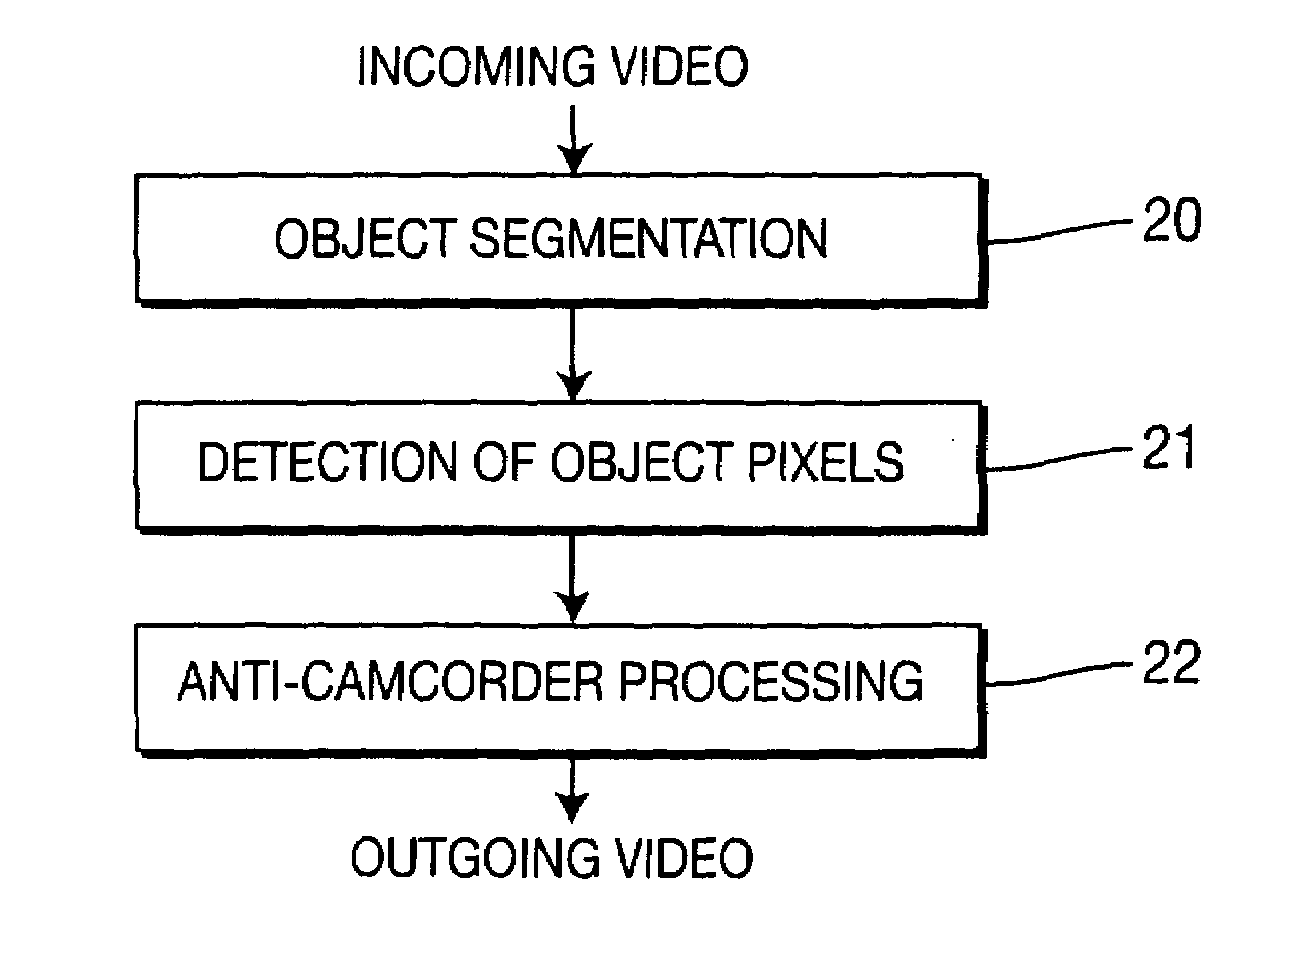 Method of processing images to combat copying